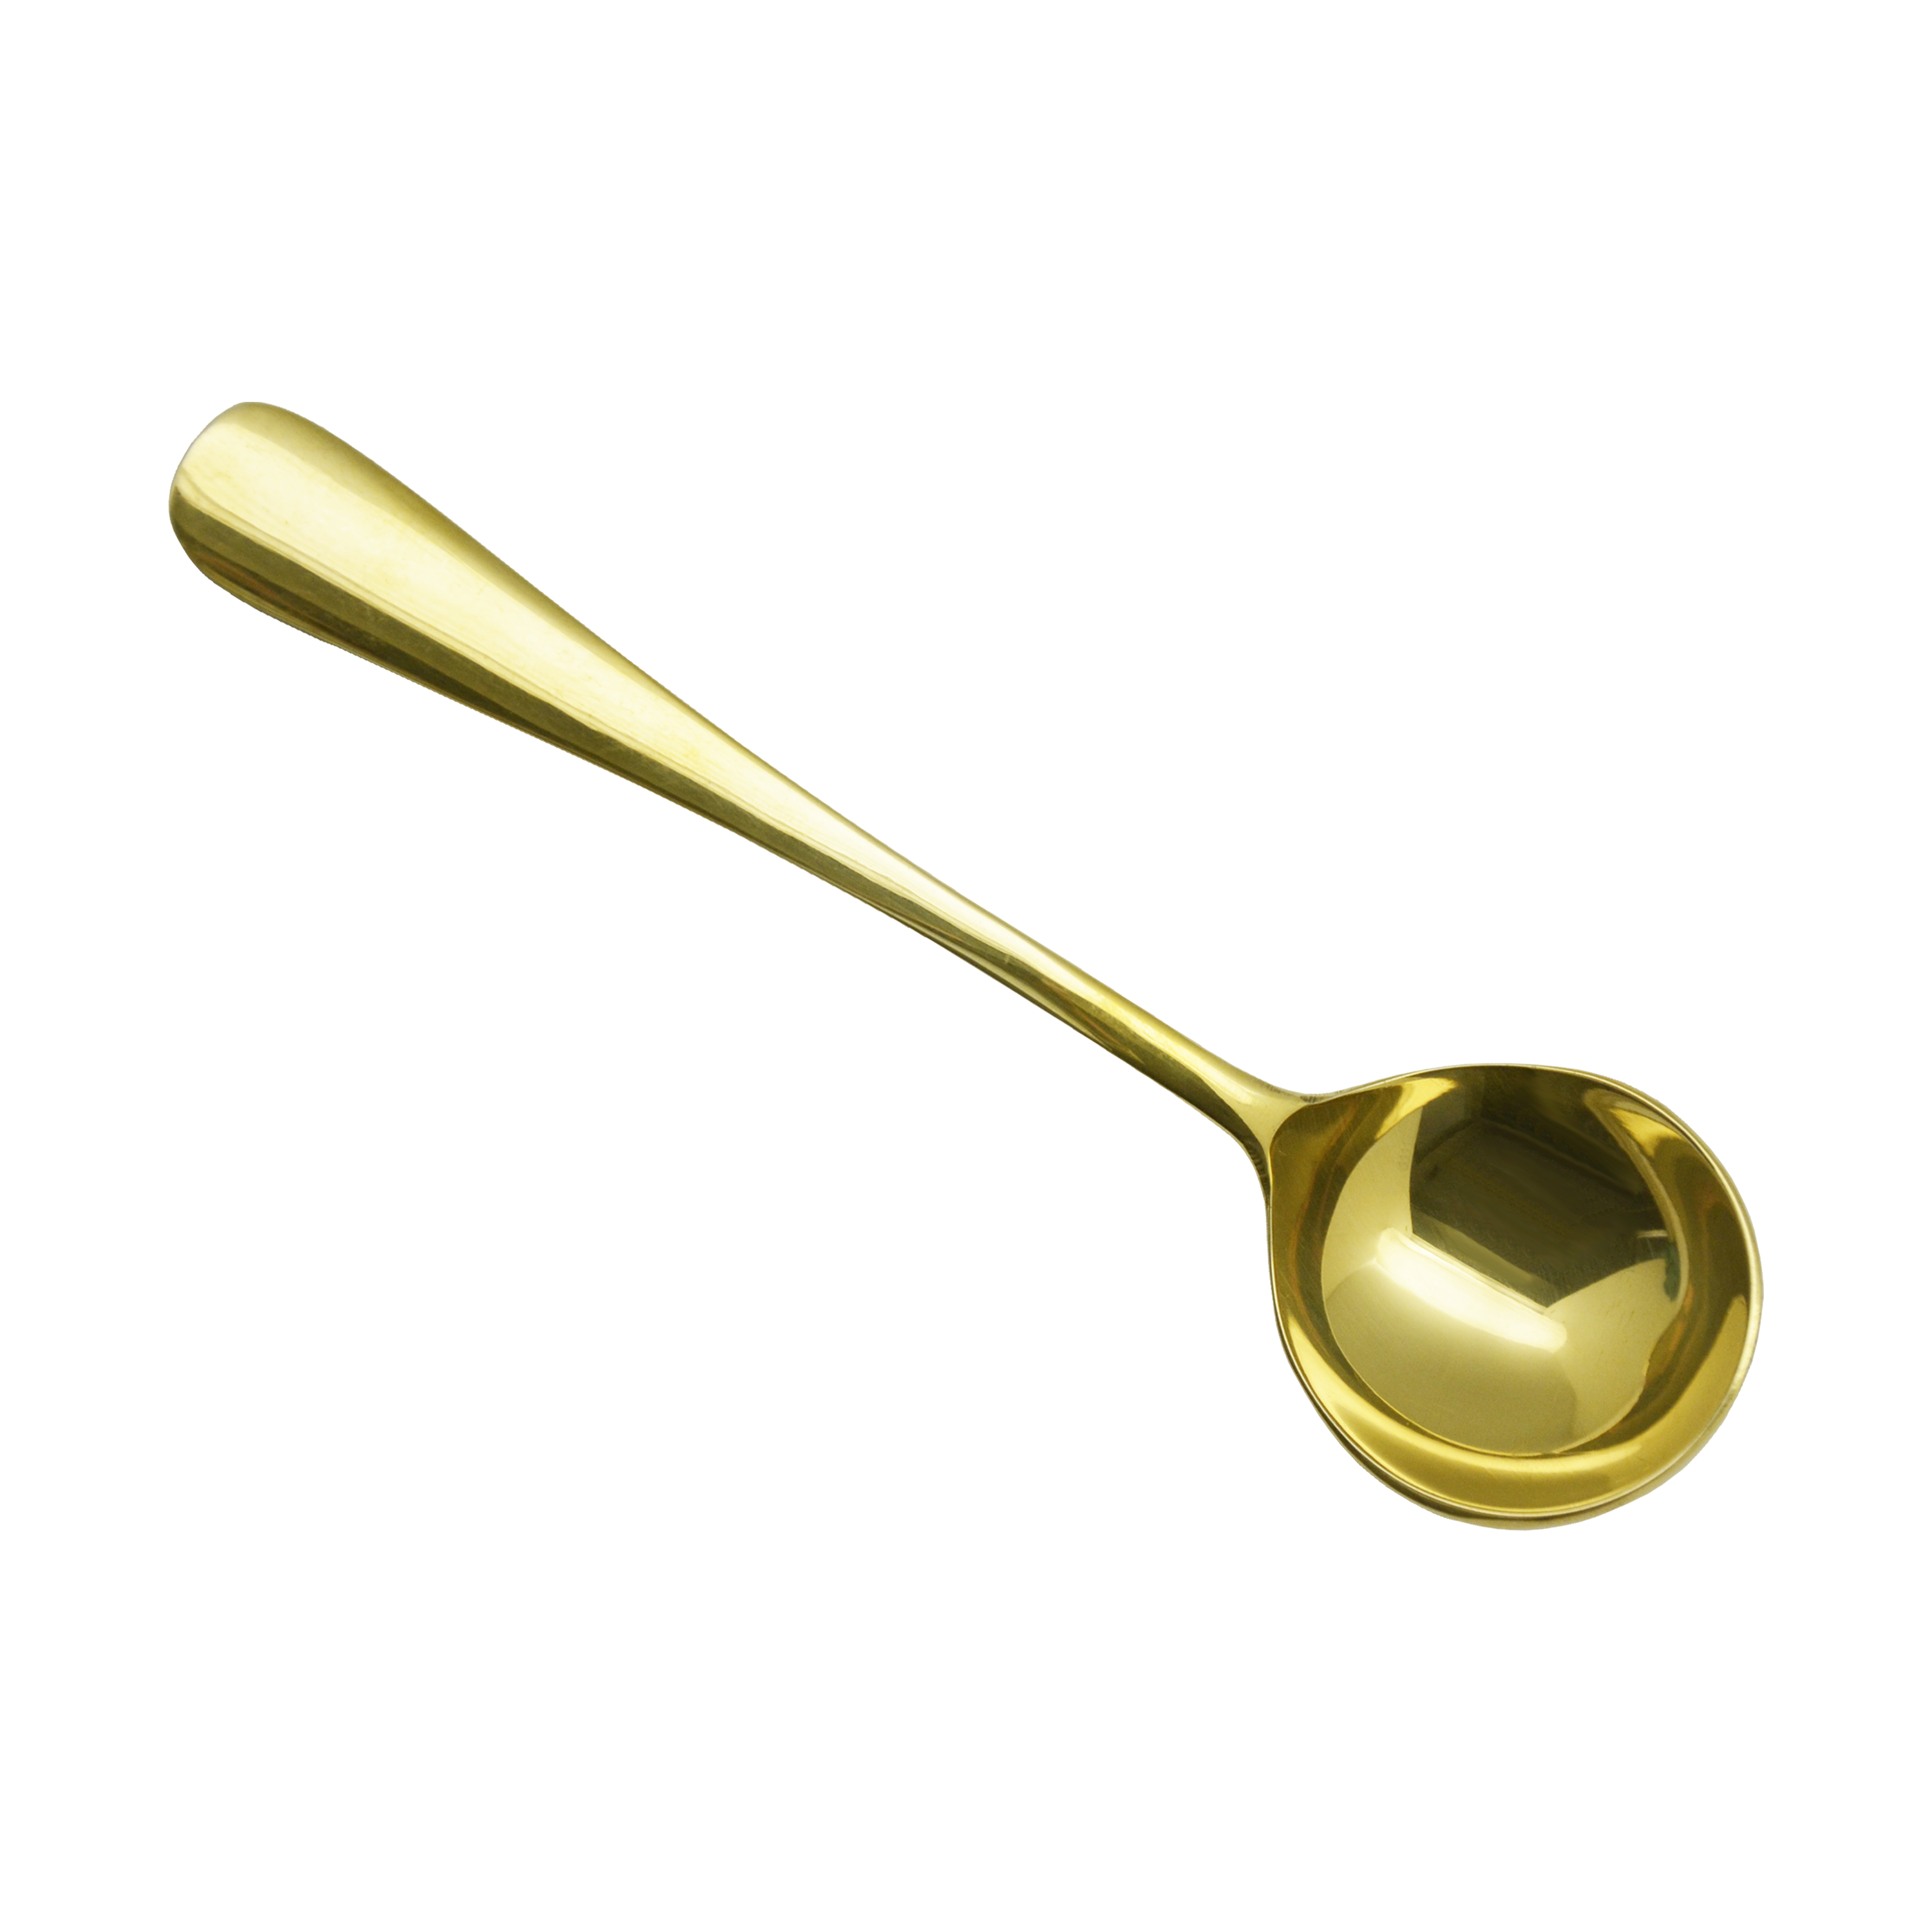 Coffee Cupping Spoon - Vibrant Gold - Krome Dispense